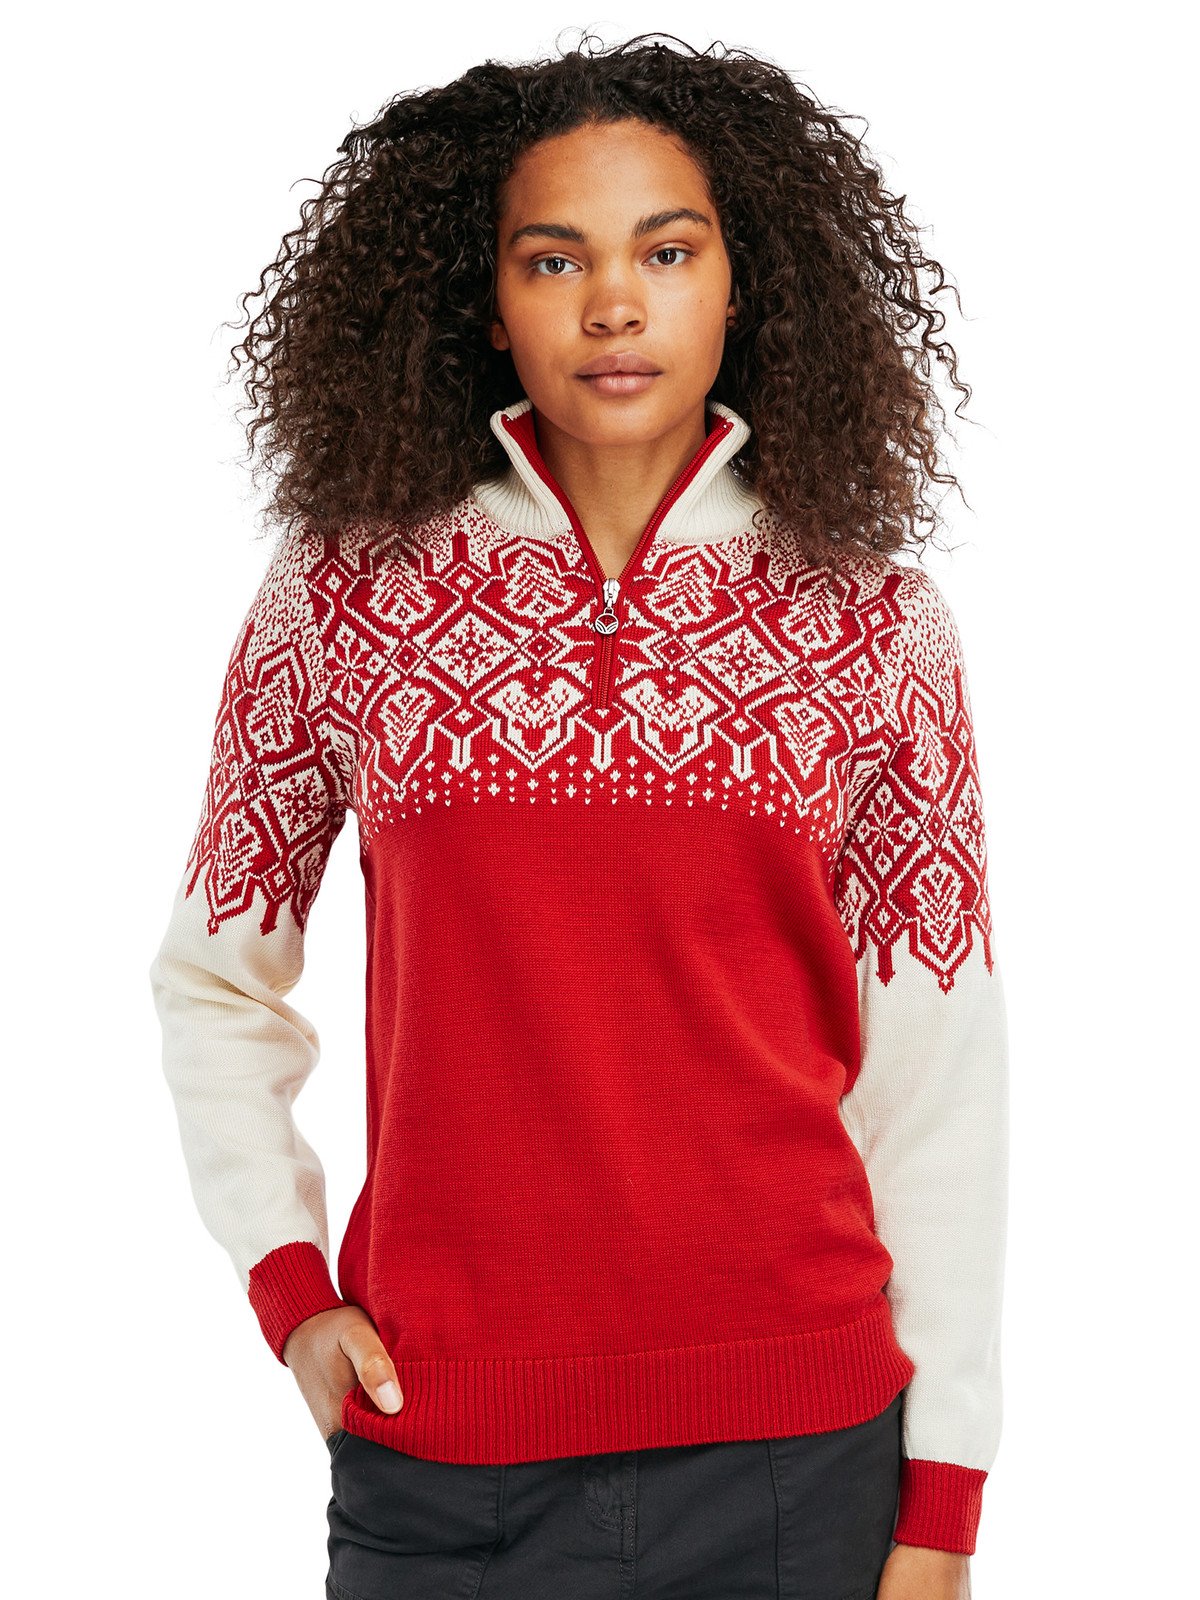 Dale of Norway Winterland Women's 1/4 Zip Sweater, Off White/Raspberry, 95281-B00_front a